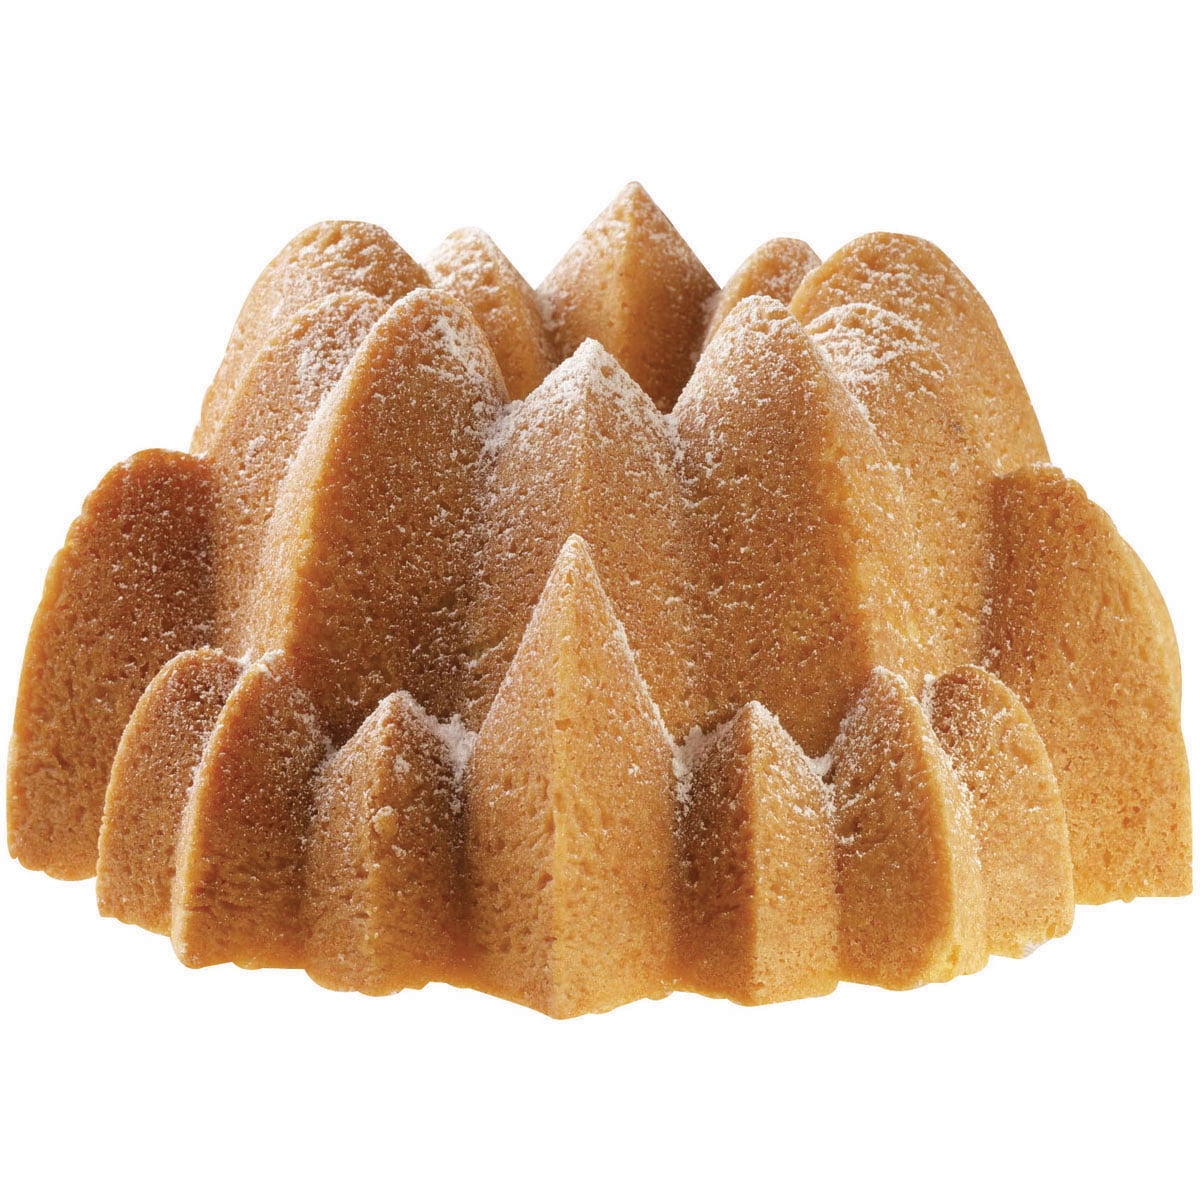 Wilton RETIRED Hearts Bundt Pan Mold Ultra Bake Dimensions for